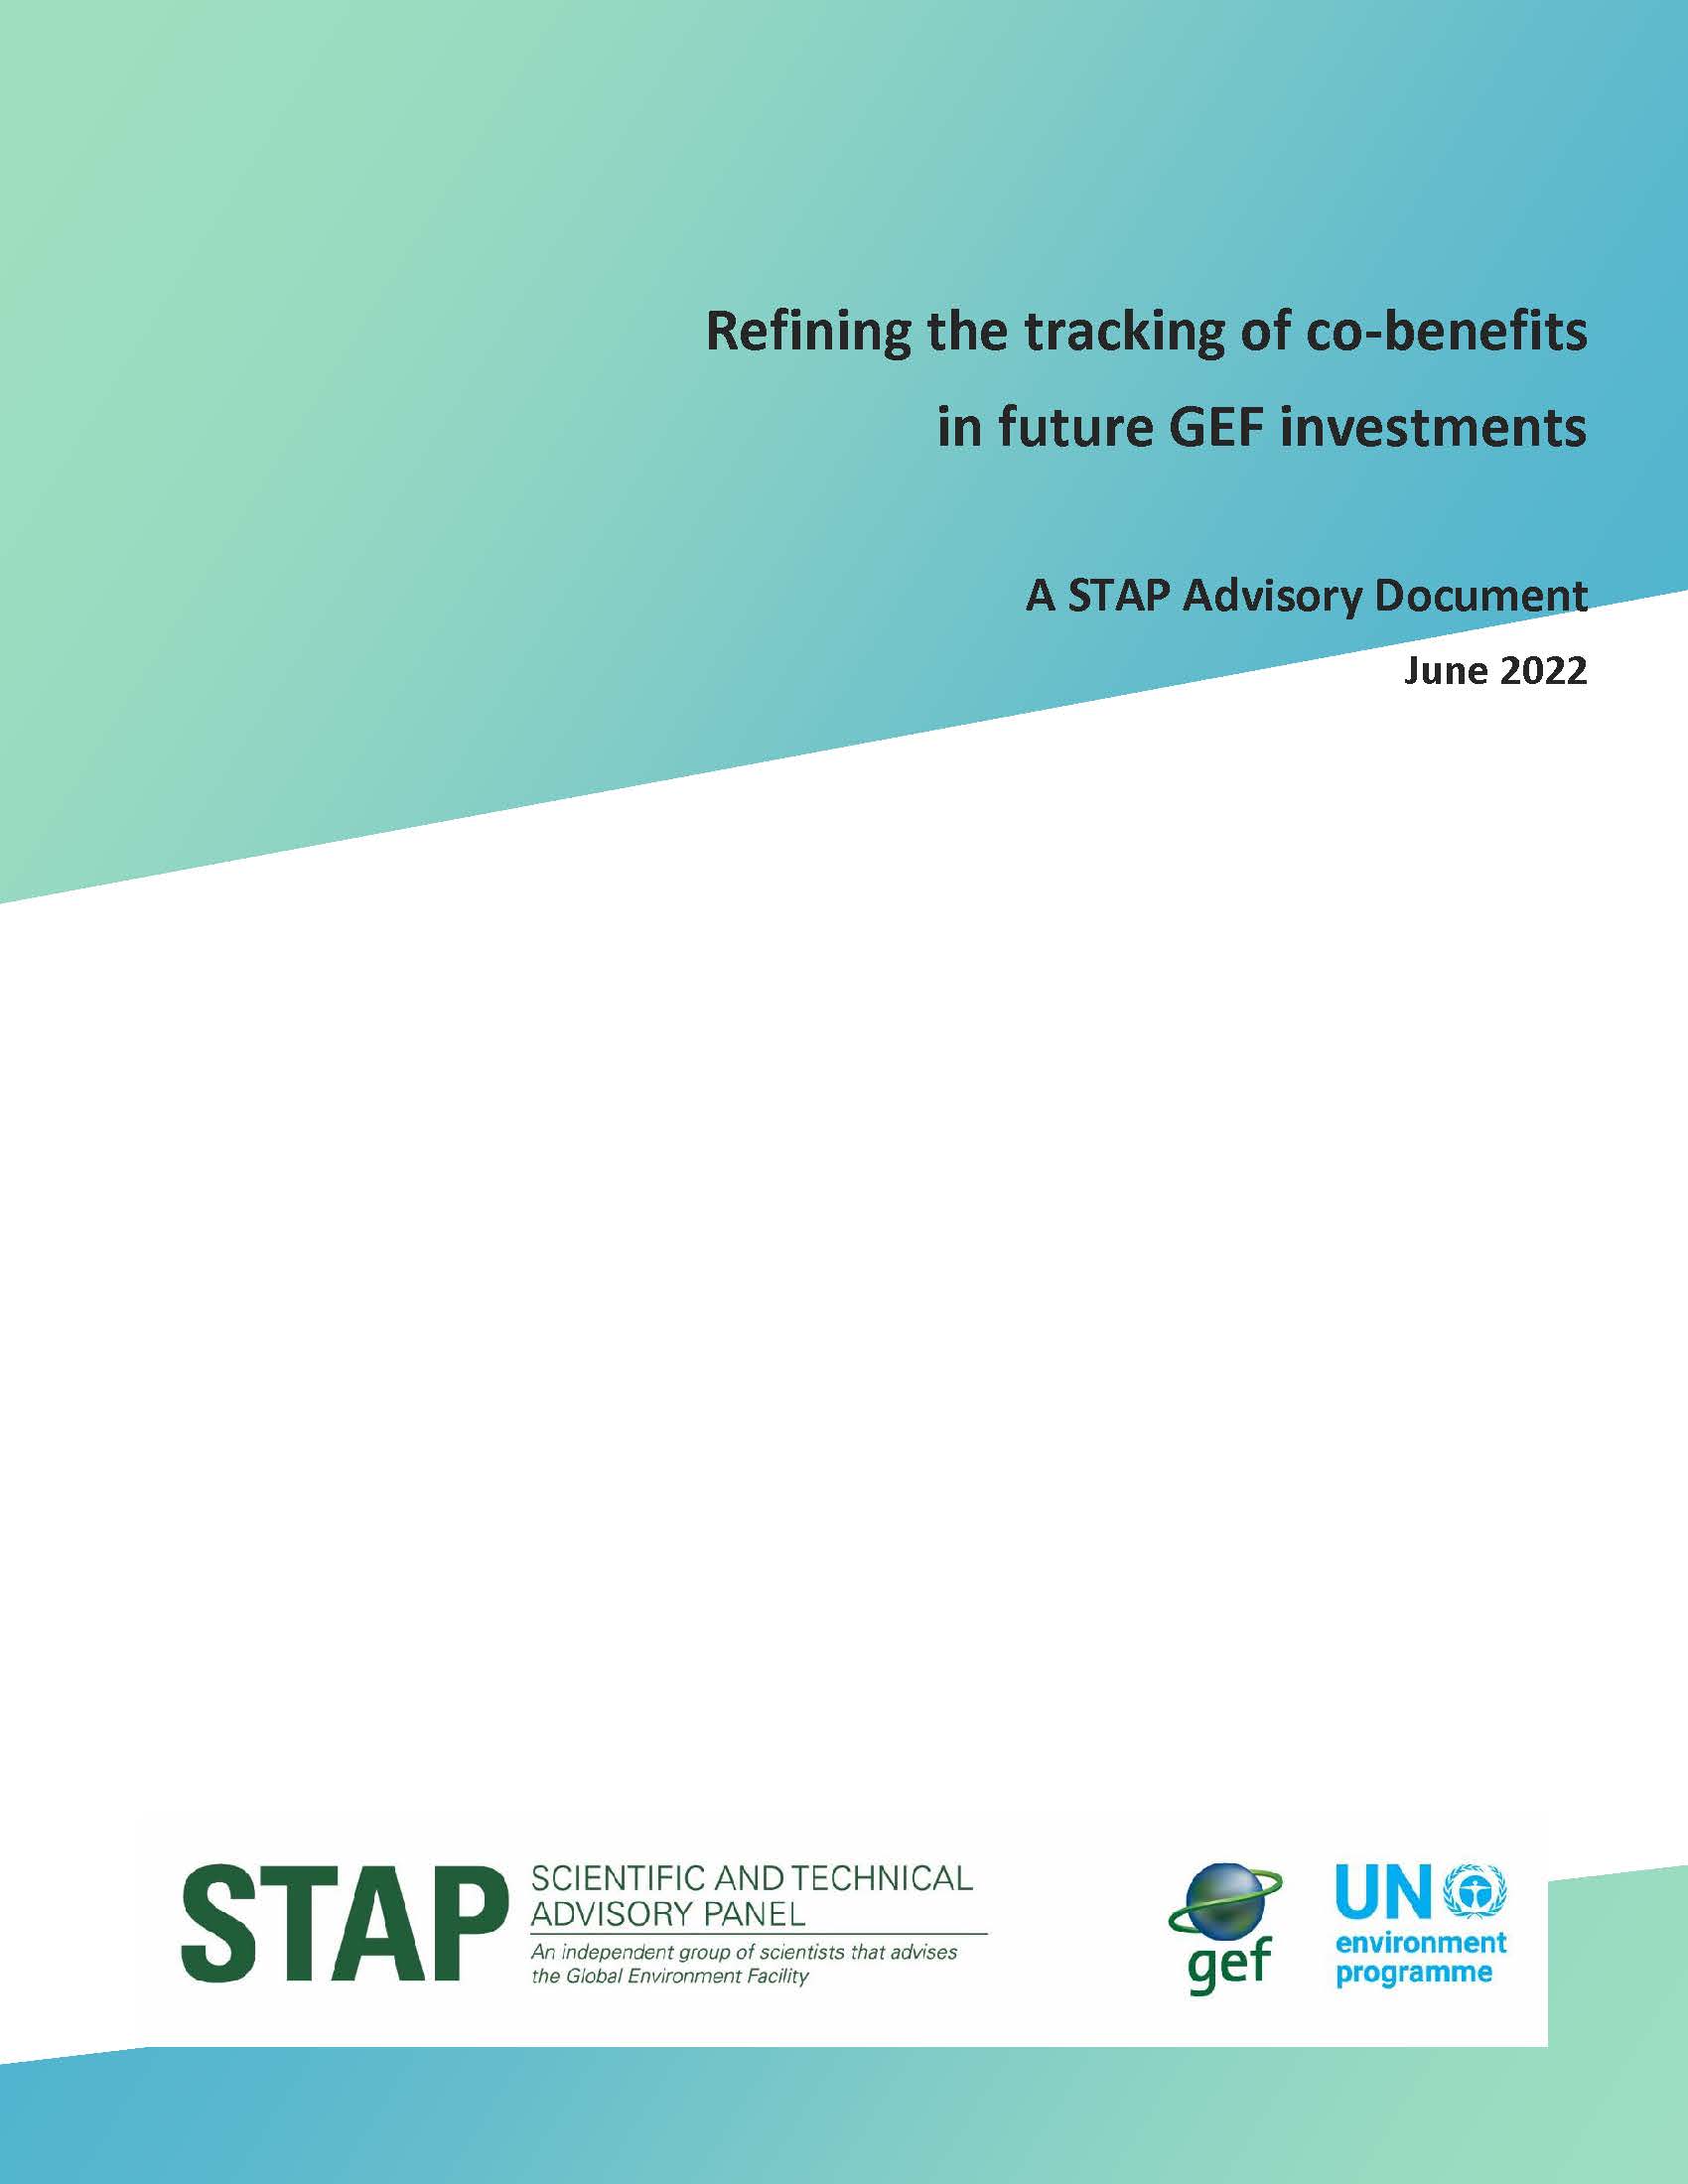 Refining the tracking of co-benefits in future GEF investments